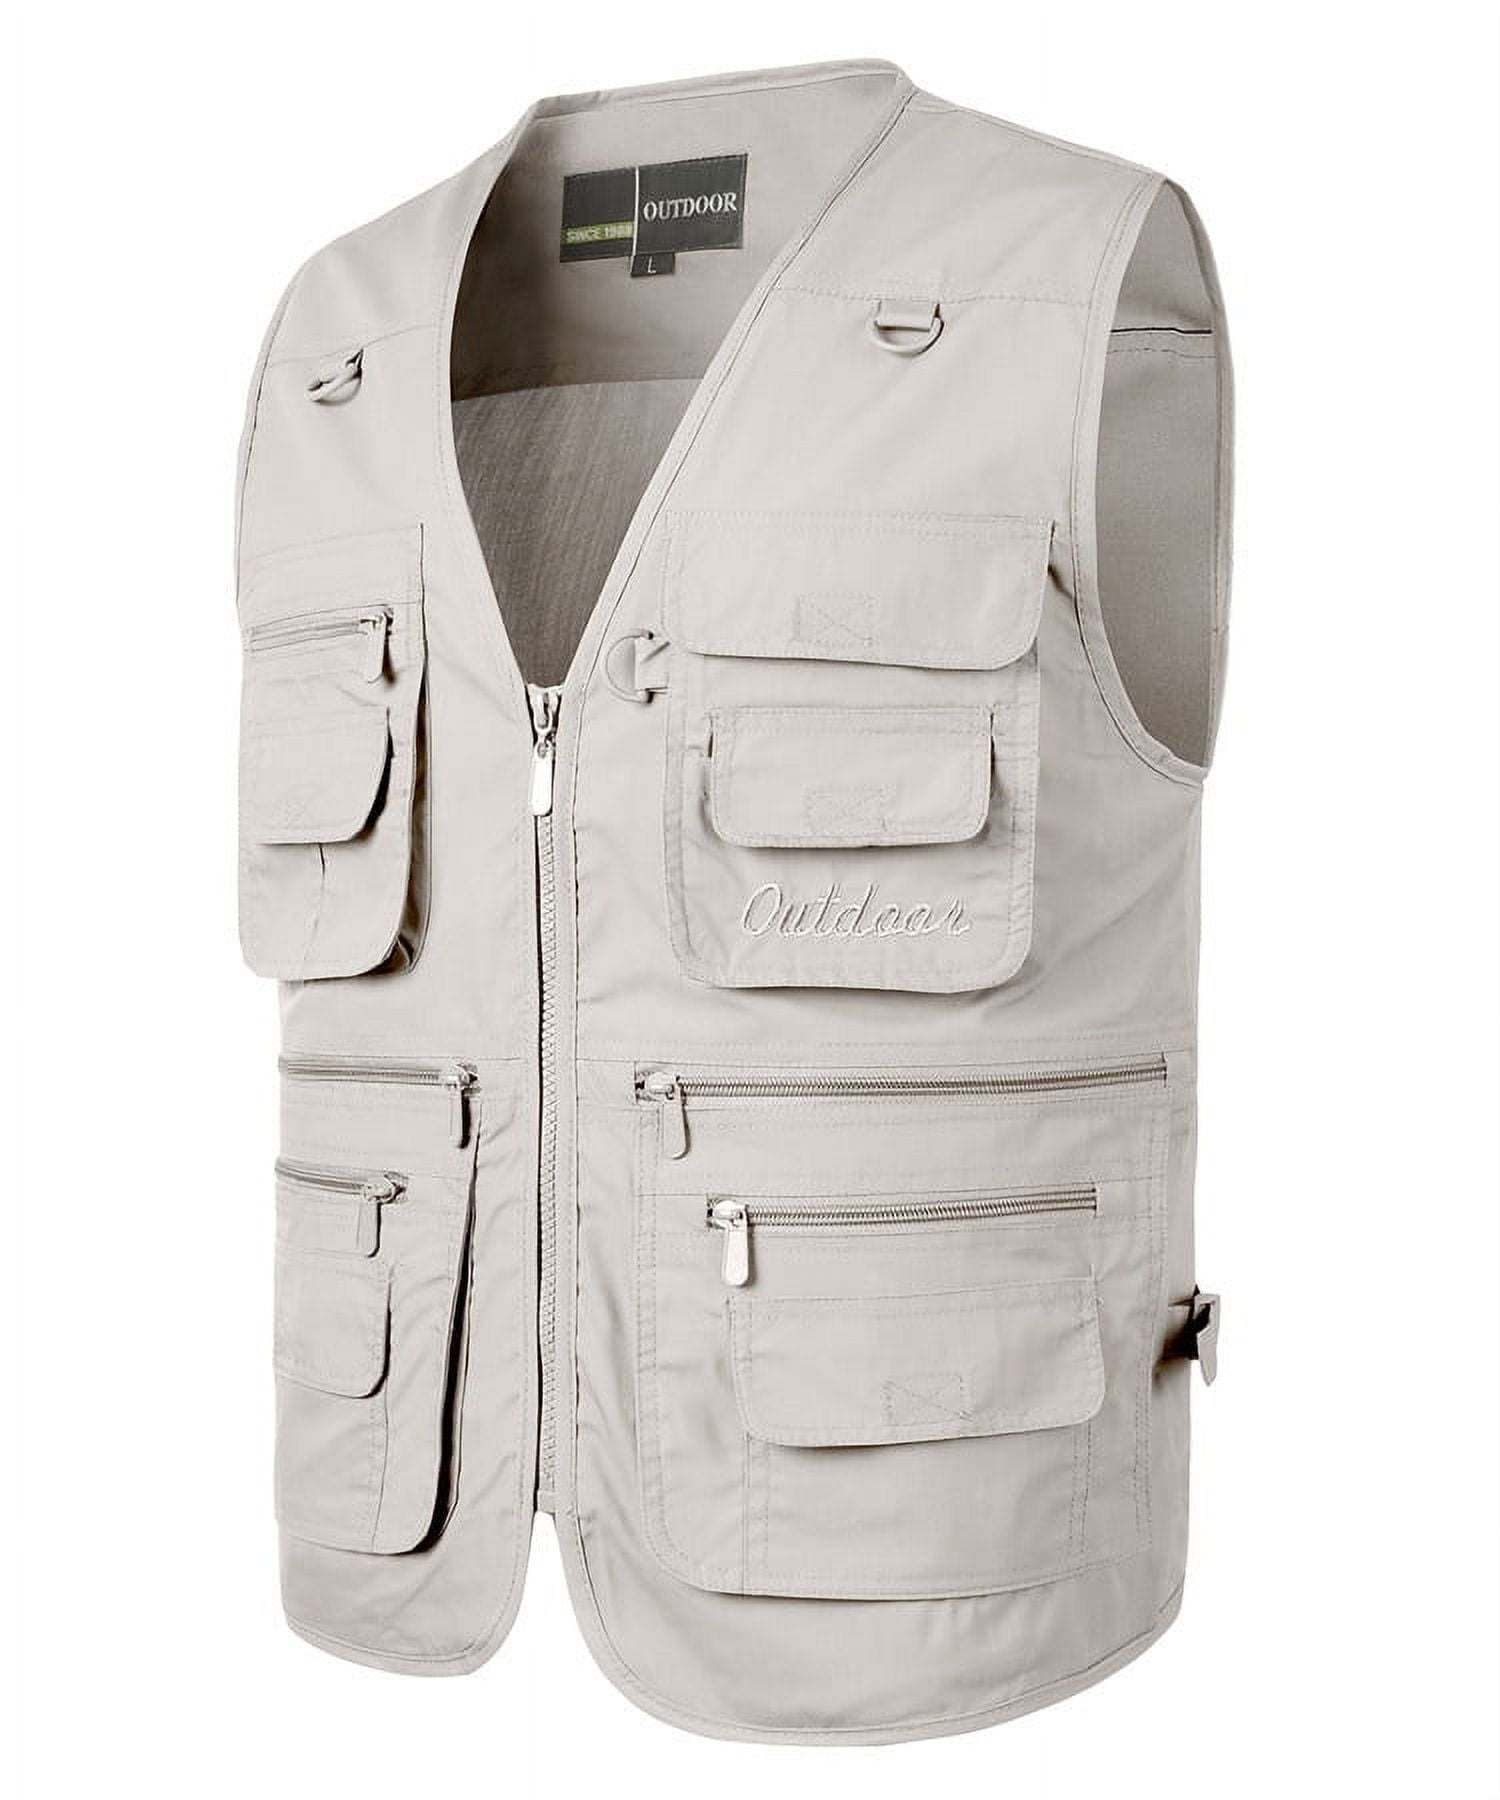 Men's Vest Sleeveless Jacket with Many Practical Pockets Outdoor